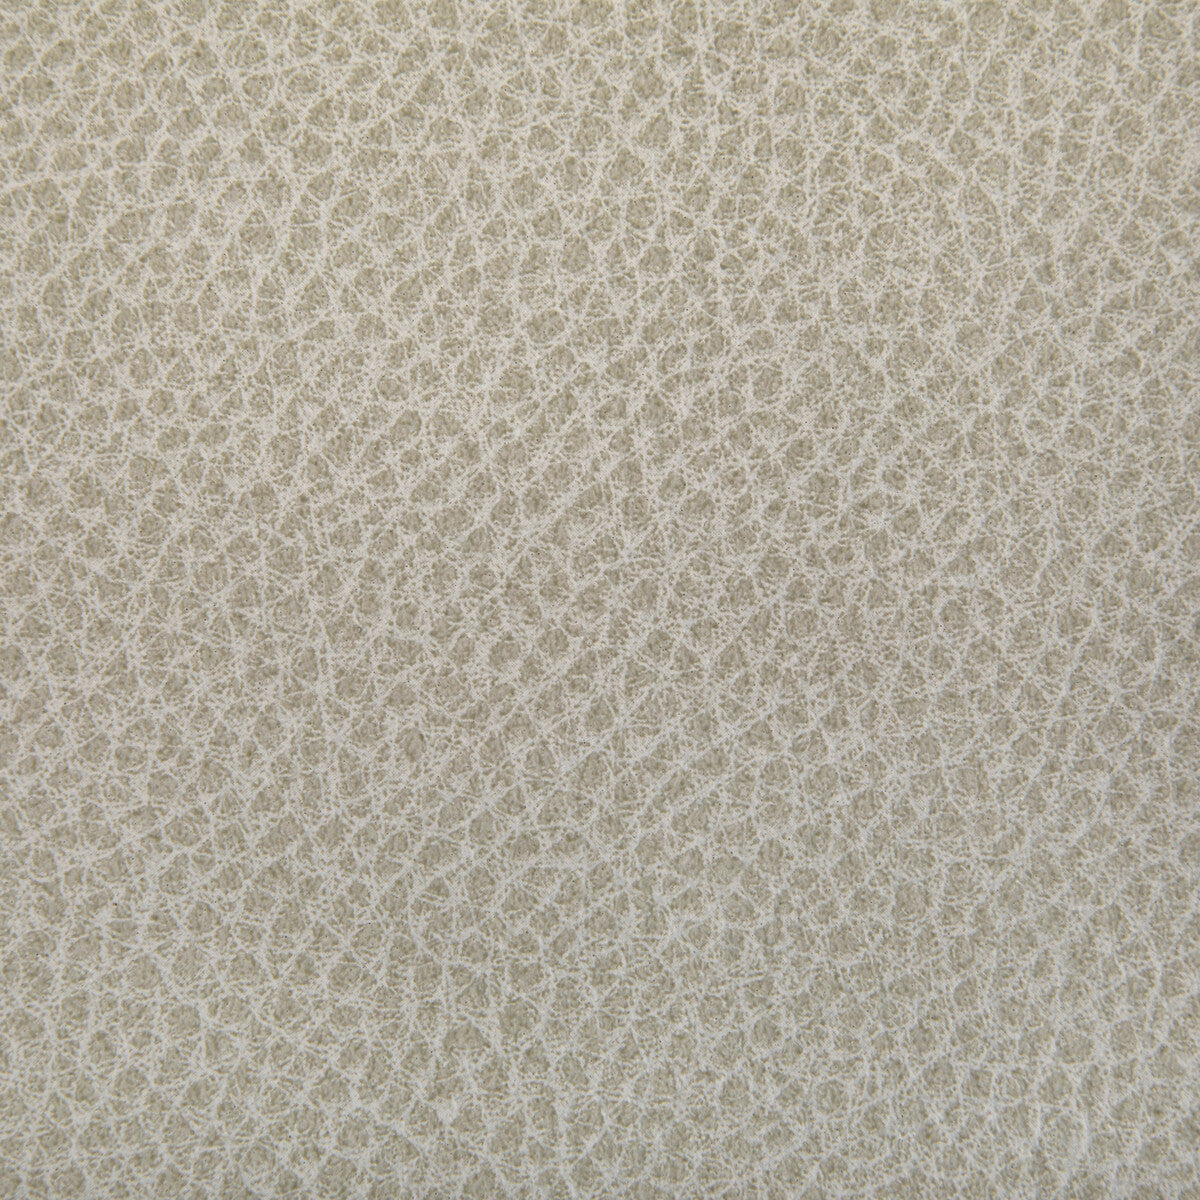 Woolf fabric in limestone color - pattern WOOLF.1.0 - by Kravet Contract